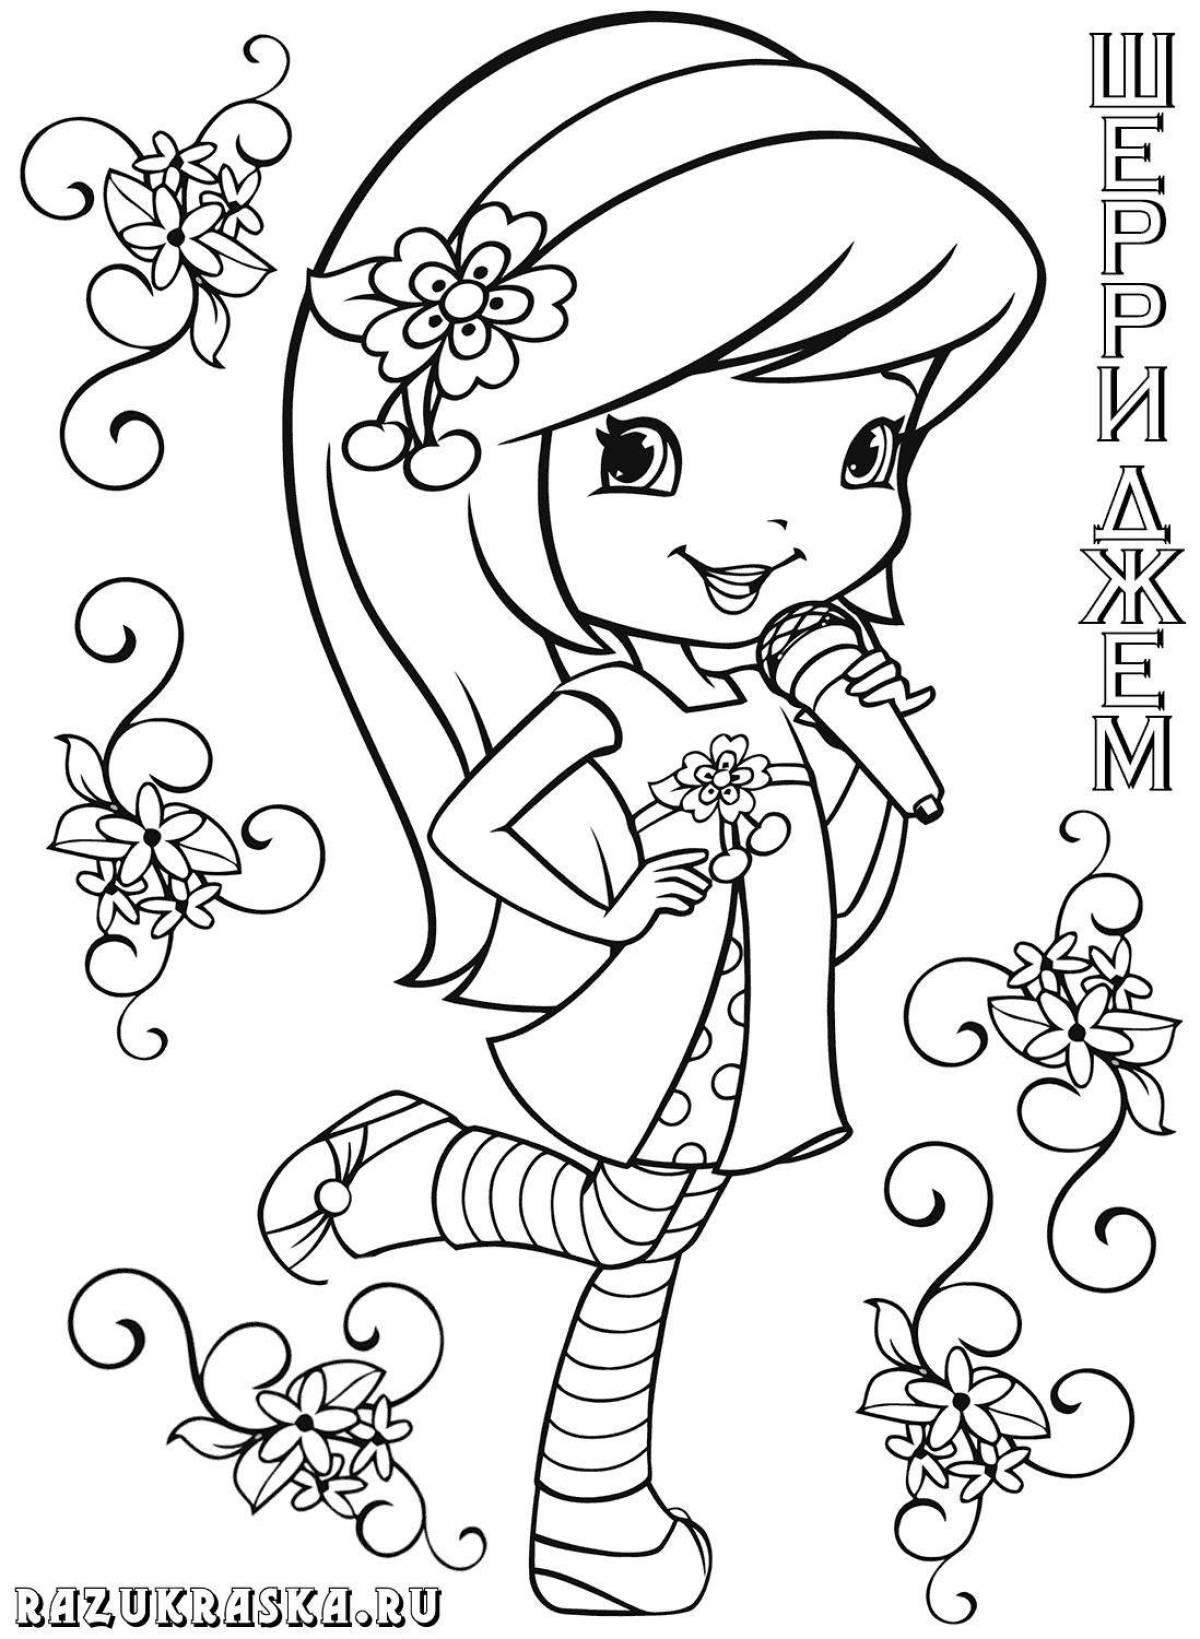 Sunny berries coloring page for girls